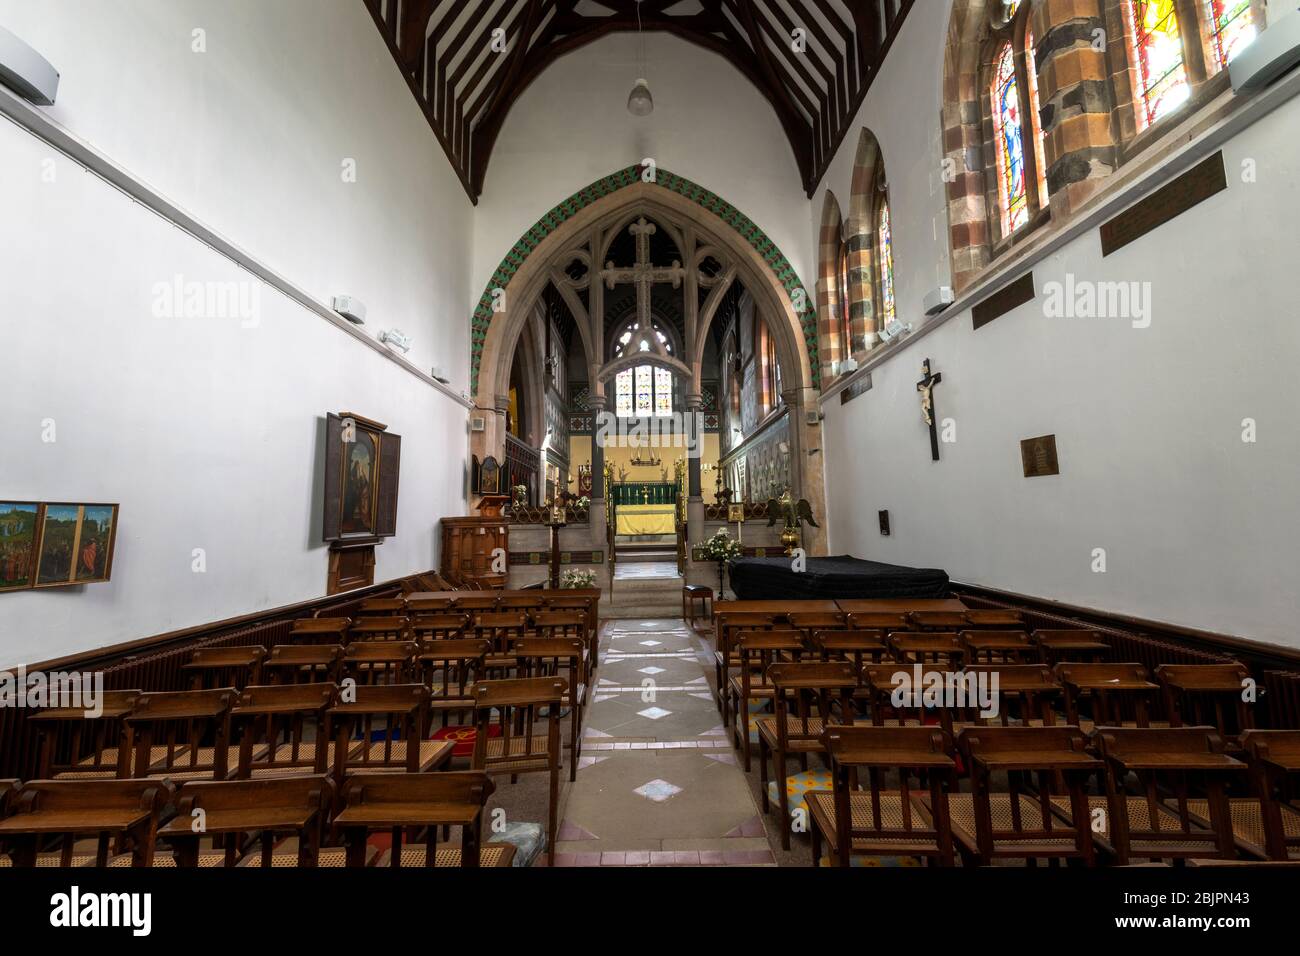 The interior of the Cathedral of the Isles (Scottish Episcopal Church) - Britain's Smallest cathedral - Millport, Isle of Cumbrae, Ayrshire, Scotland, Stock Photo